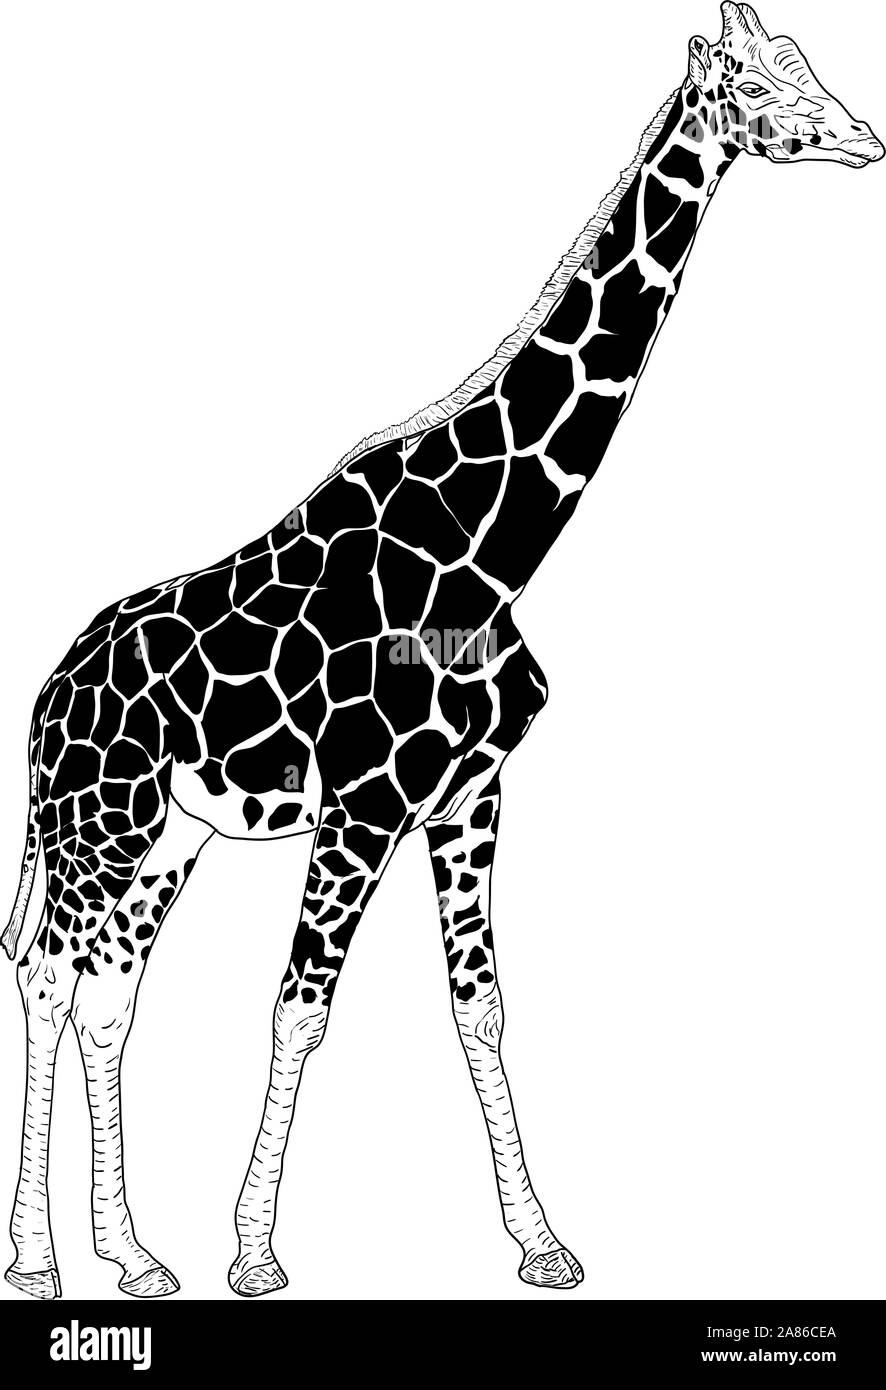 Sketch of a high African giraffe on a white background. Stock Vector